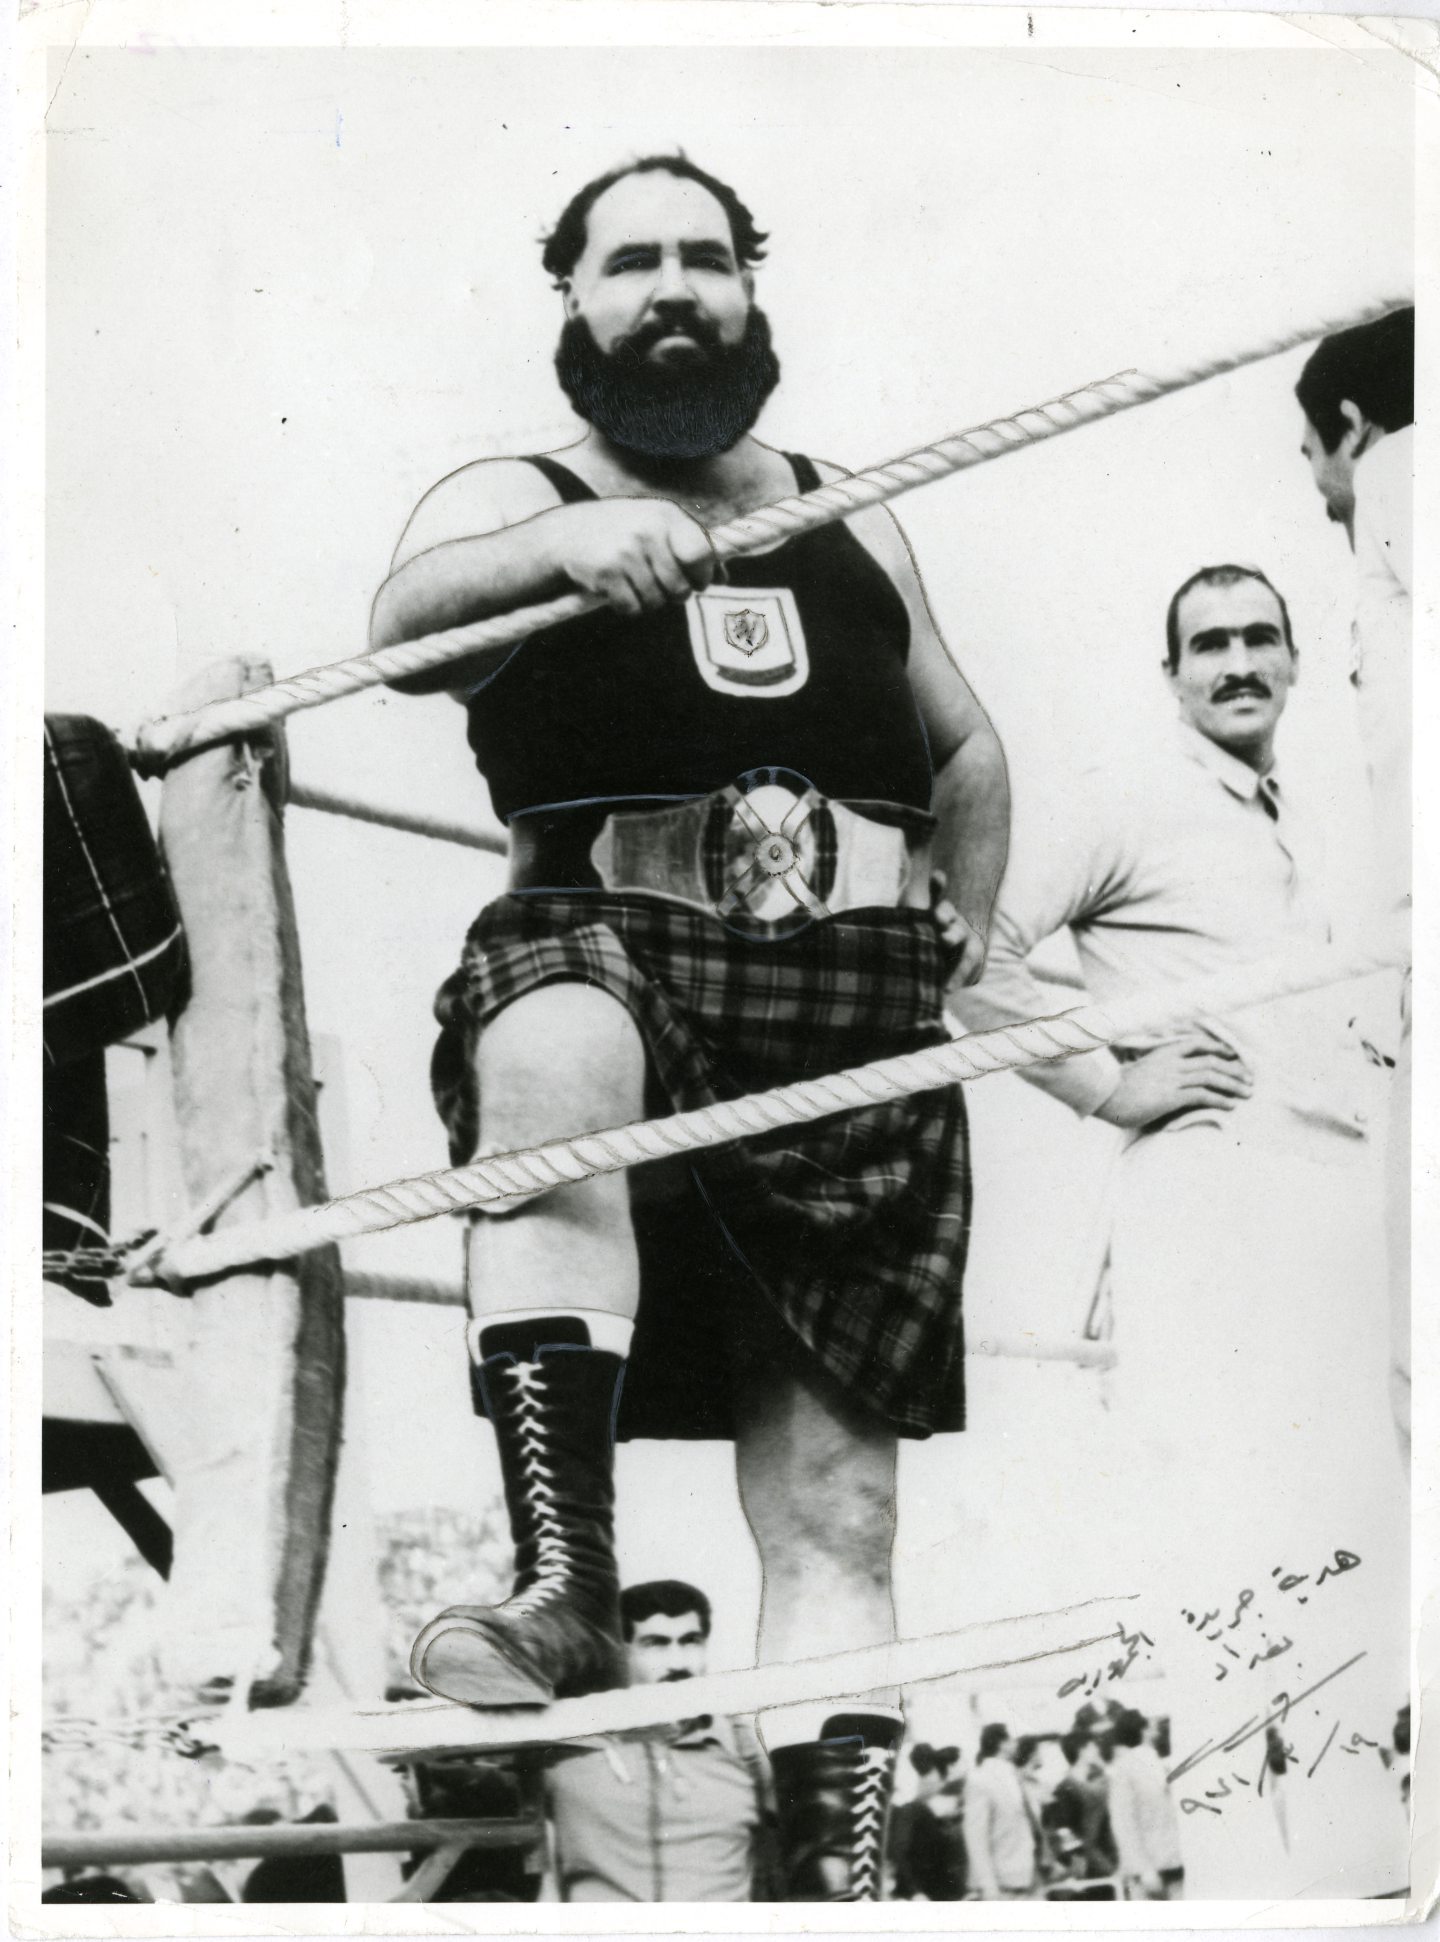 Dunfermline wrestling hero Ian Campbell in his kilt in the ring.